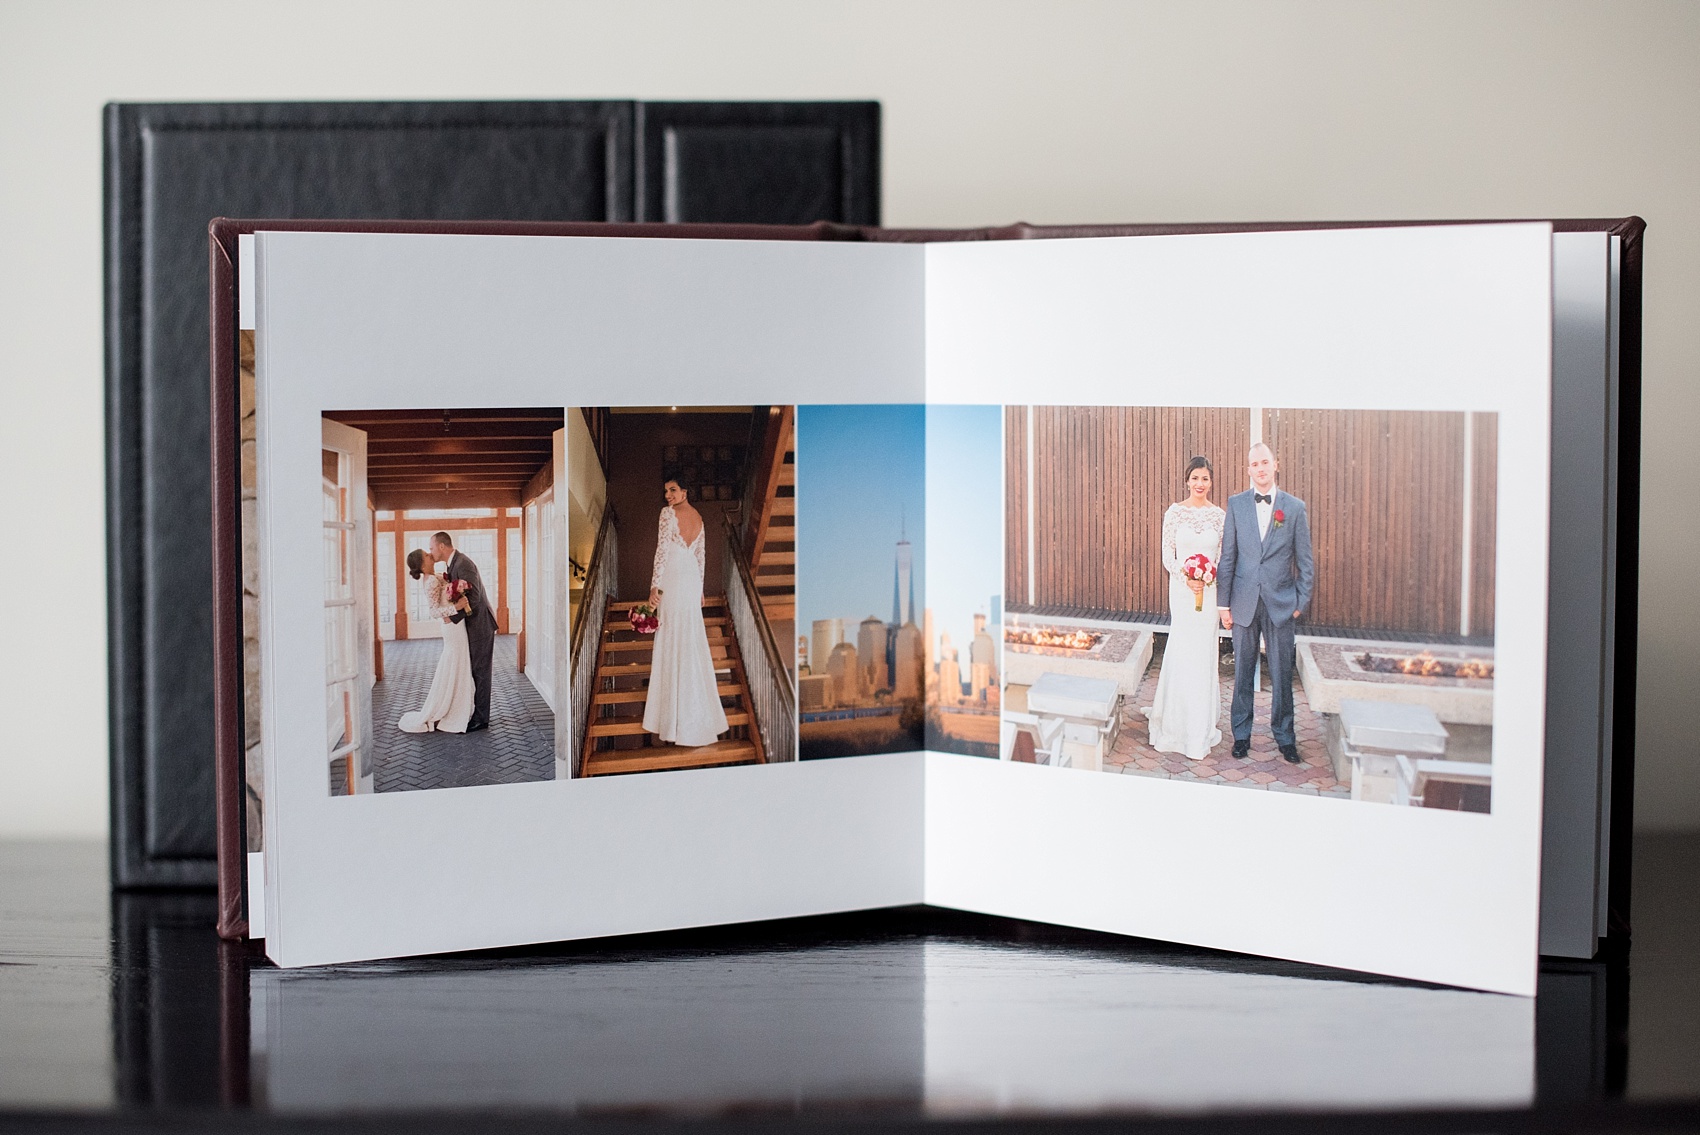 Mikkel Paige Photography photos of a fine art leather Madera wedding album in Oxblood. 12x12" album spread for the bride and groom.